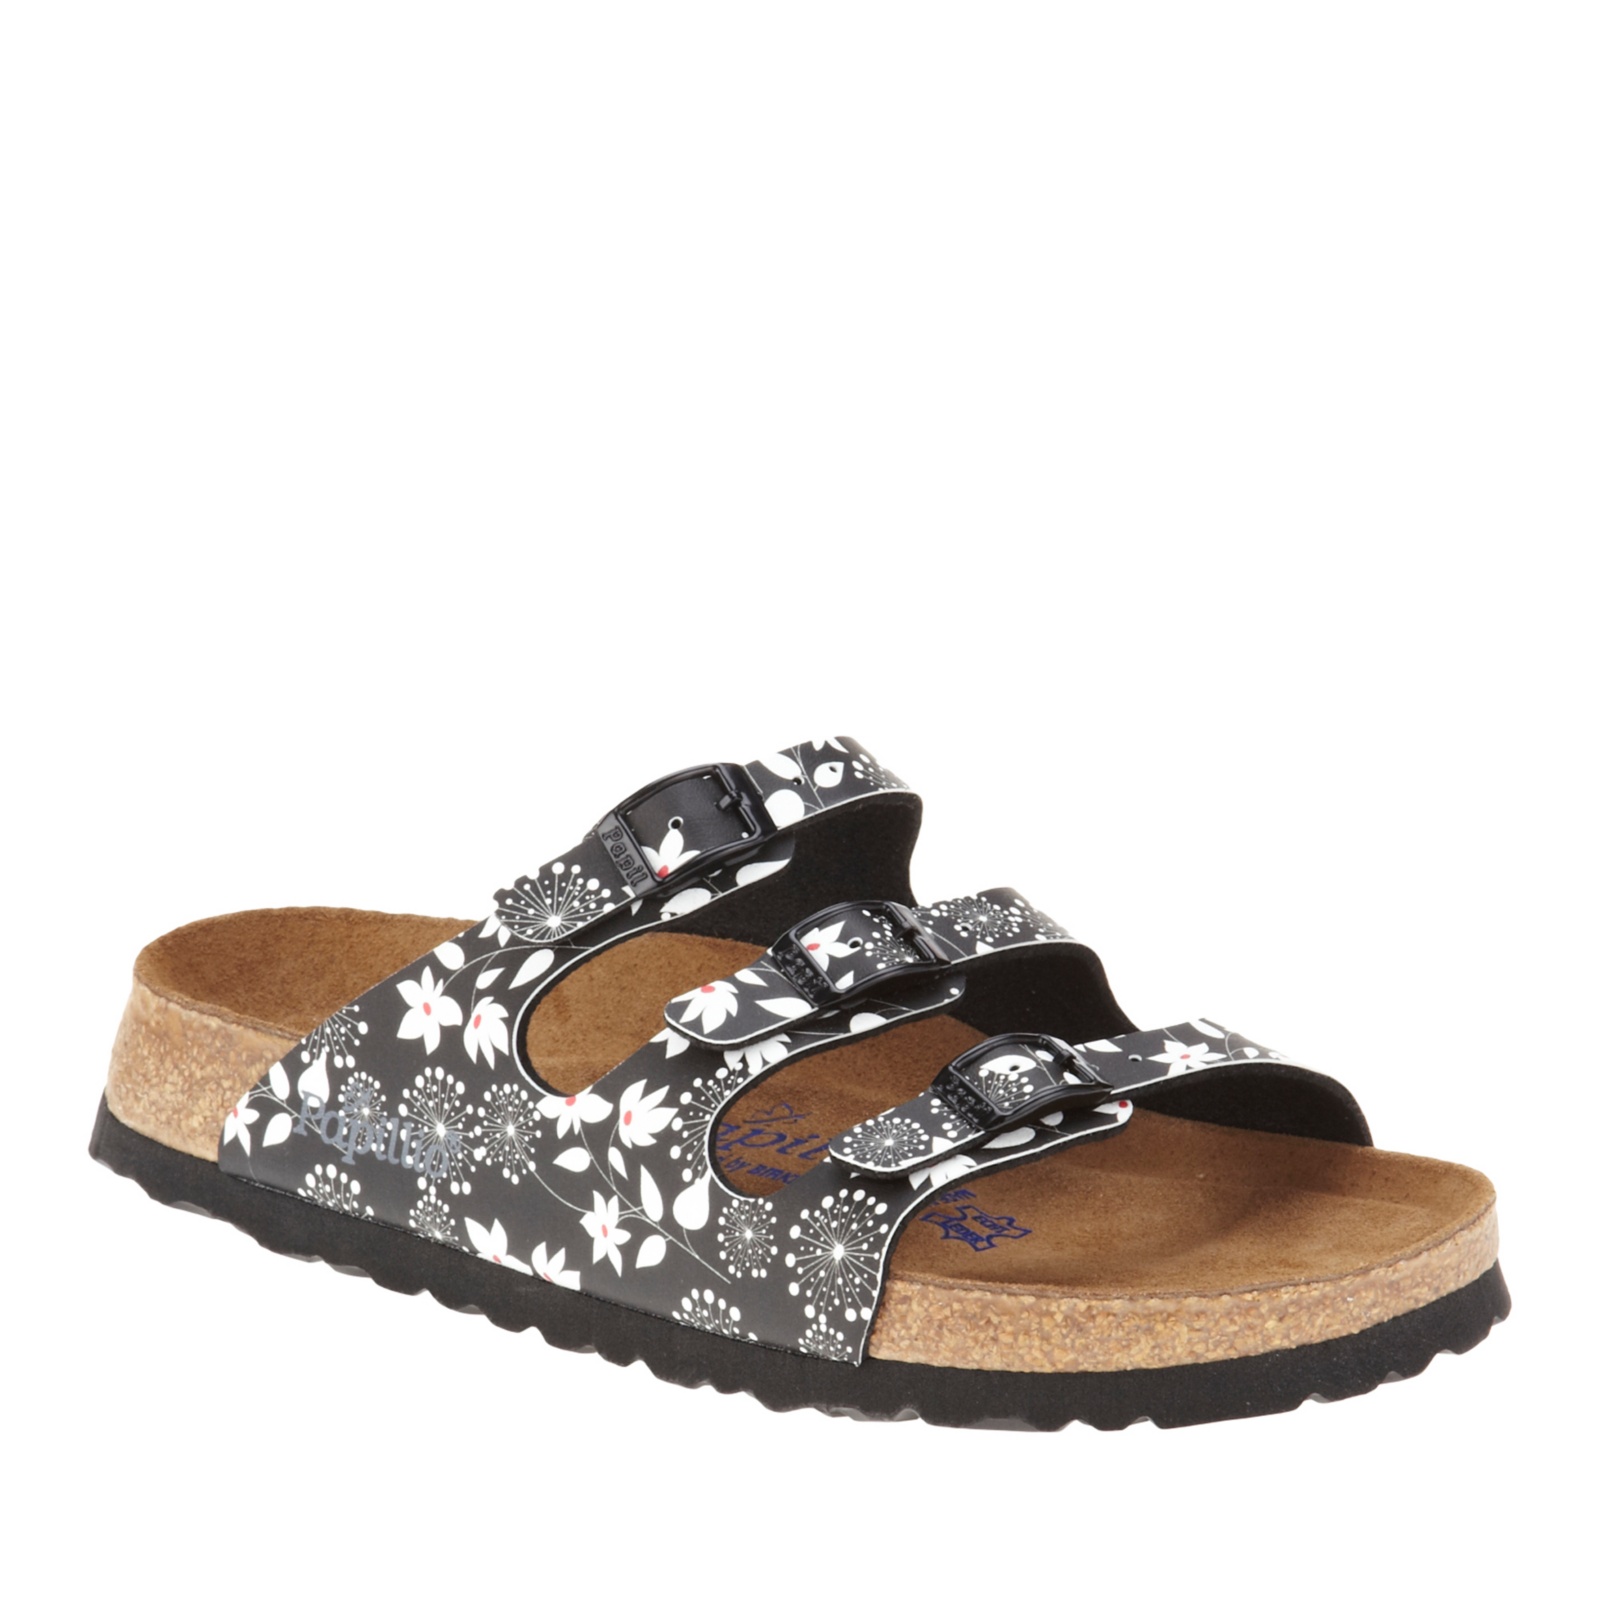 Details about Papillio by Birkenstock Florida Soft Footbed Floral ...